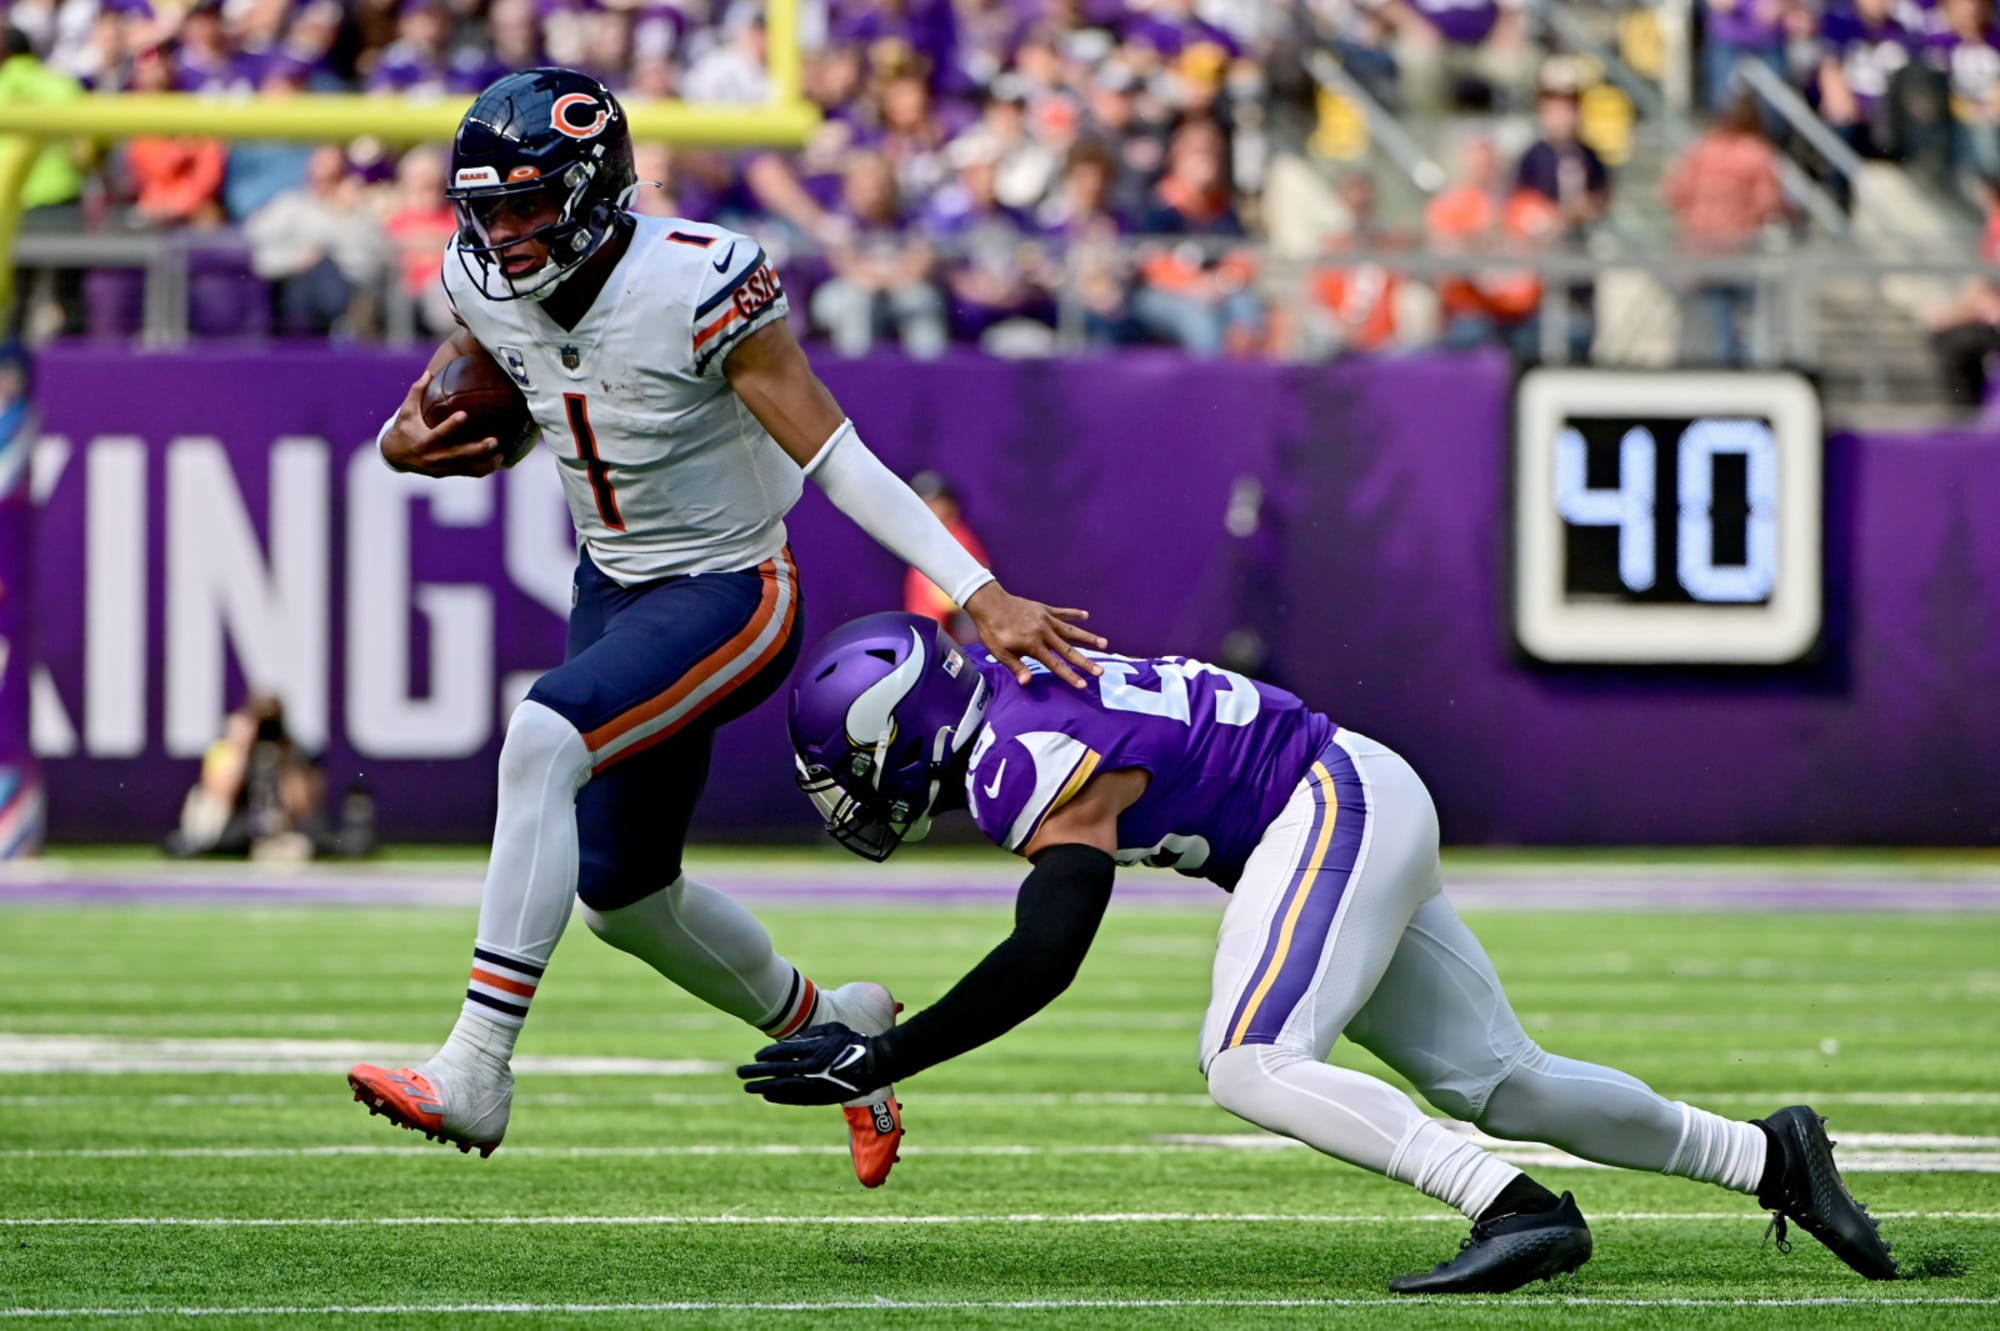 Chicago Bears show some grit in Week 5 loss to Minnesota Vikings